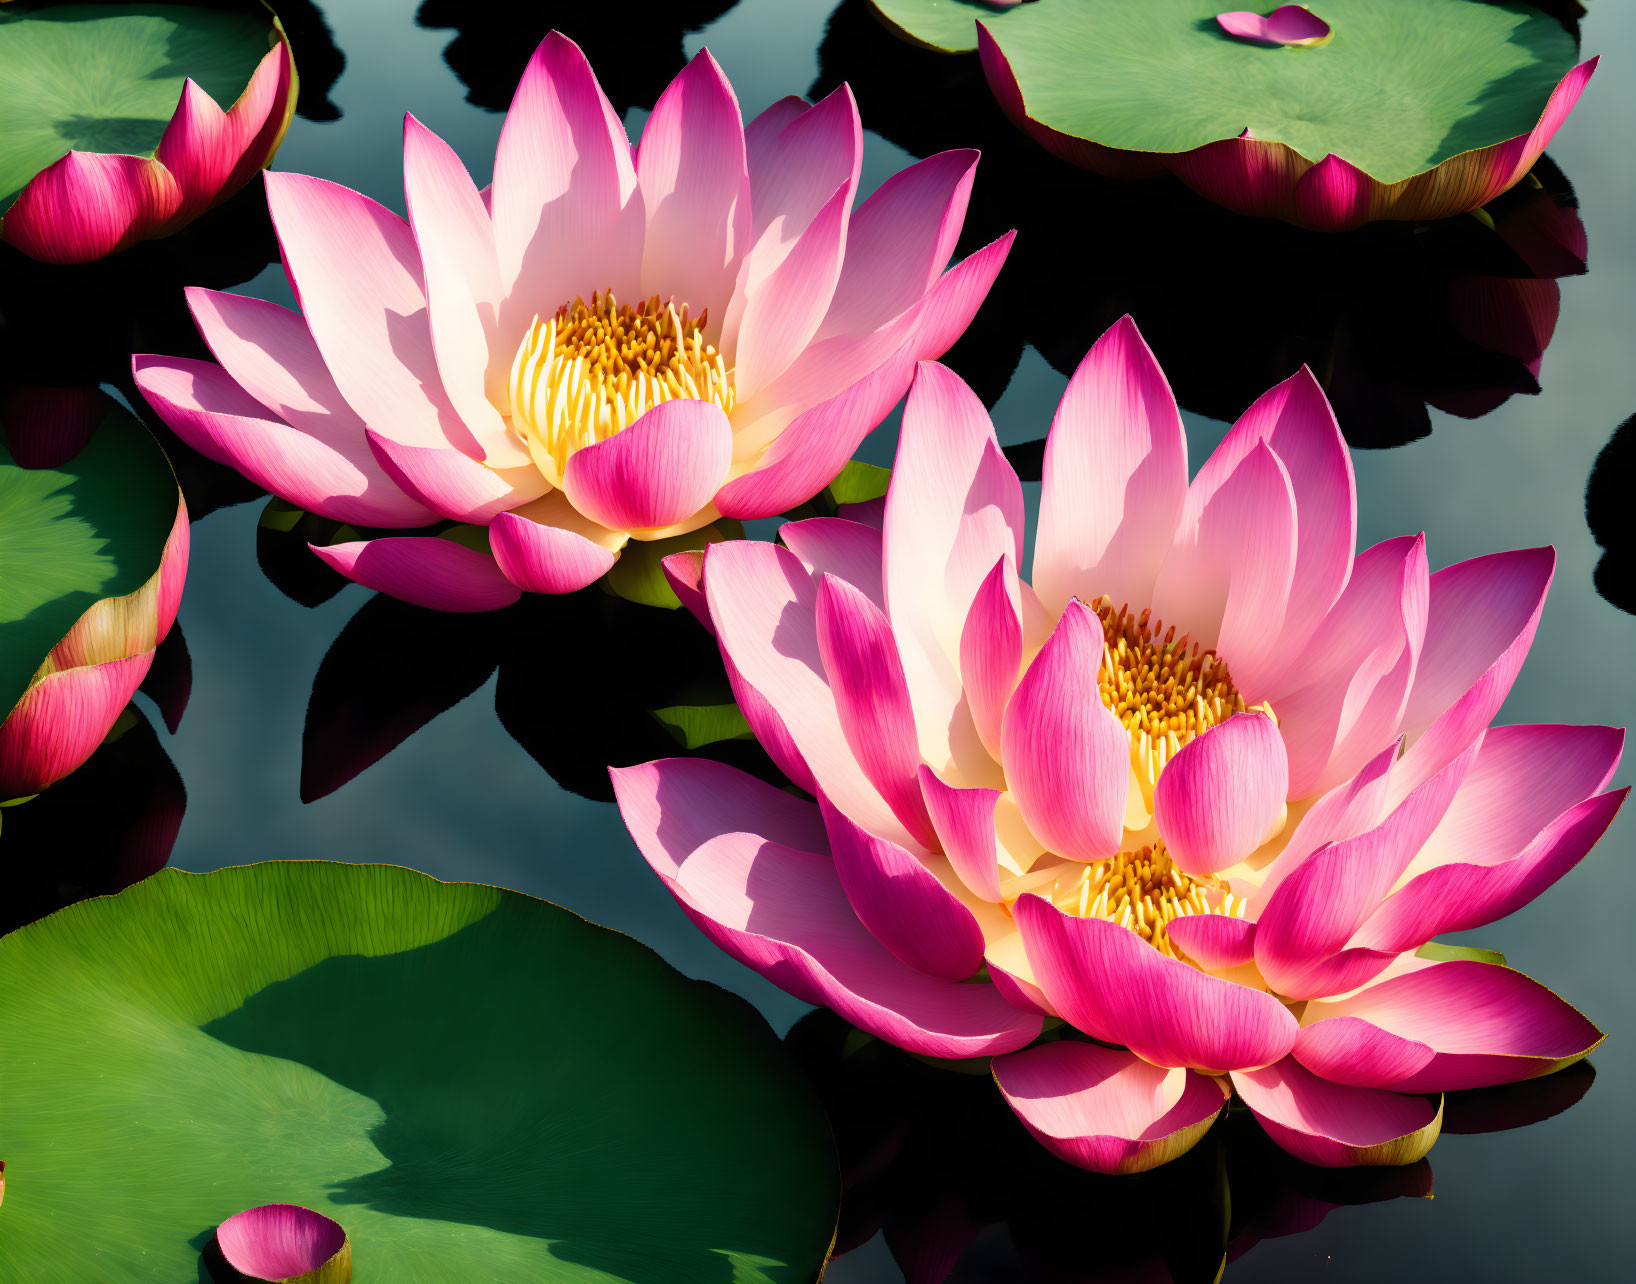 Vibrant pink lotus flowers with golden-yellow centers on water with green lily pads.